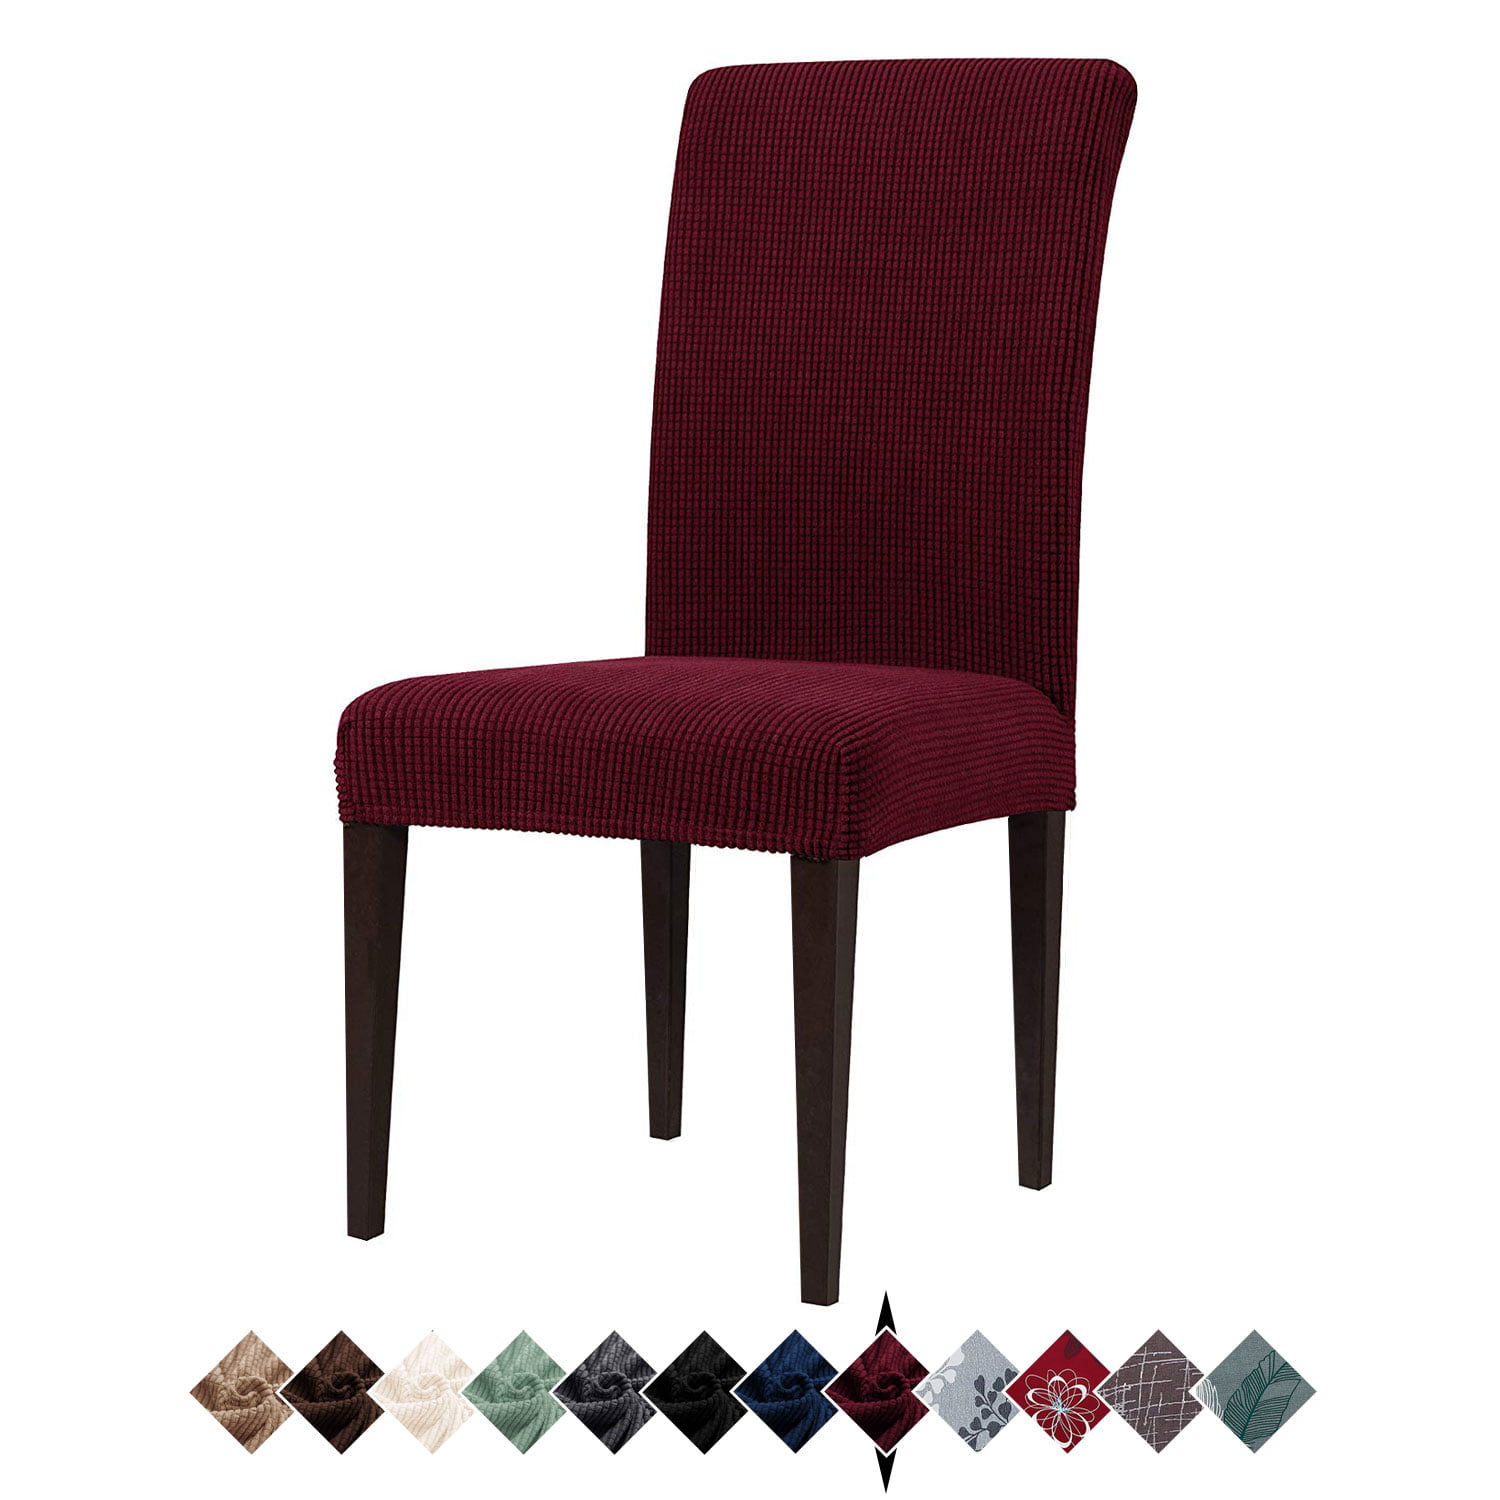 Creatice Parsons Chair Slipcovers Uk for Living room